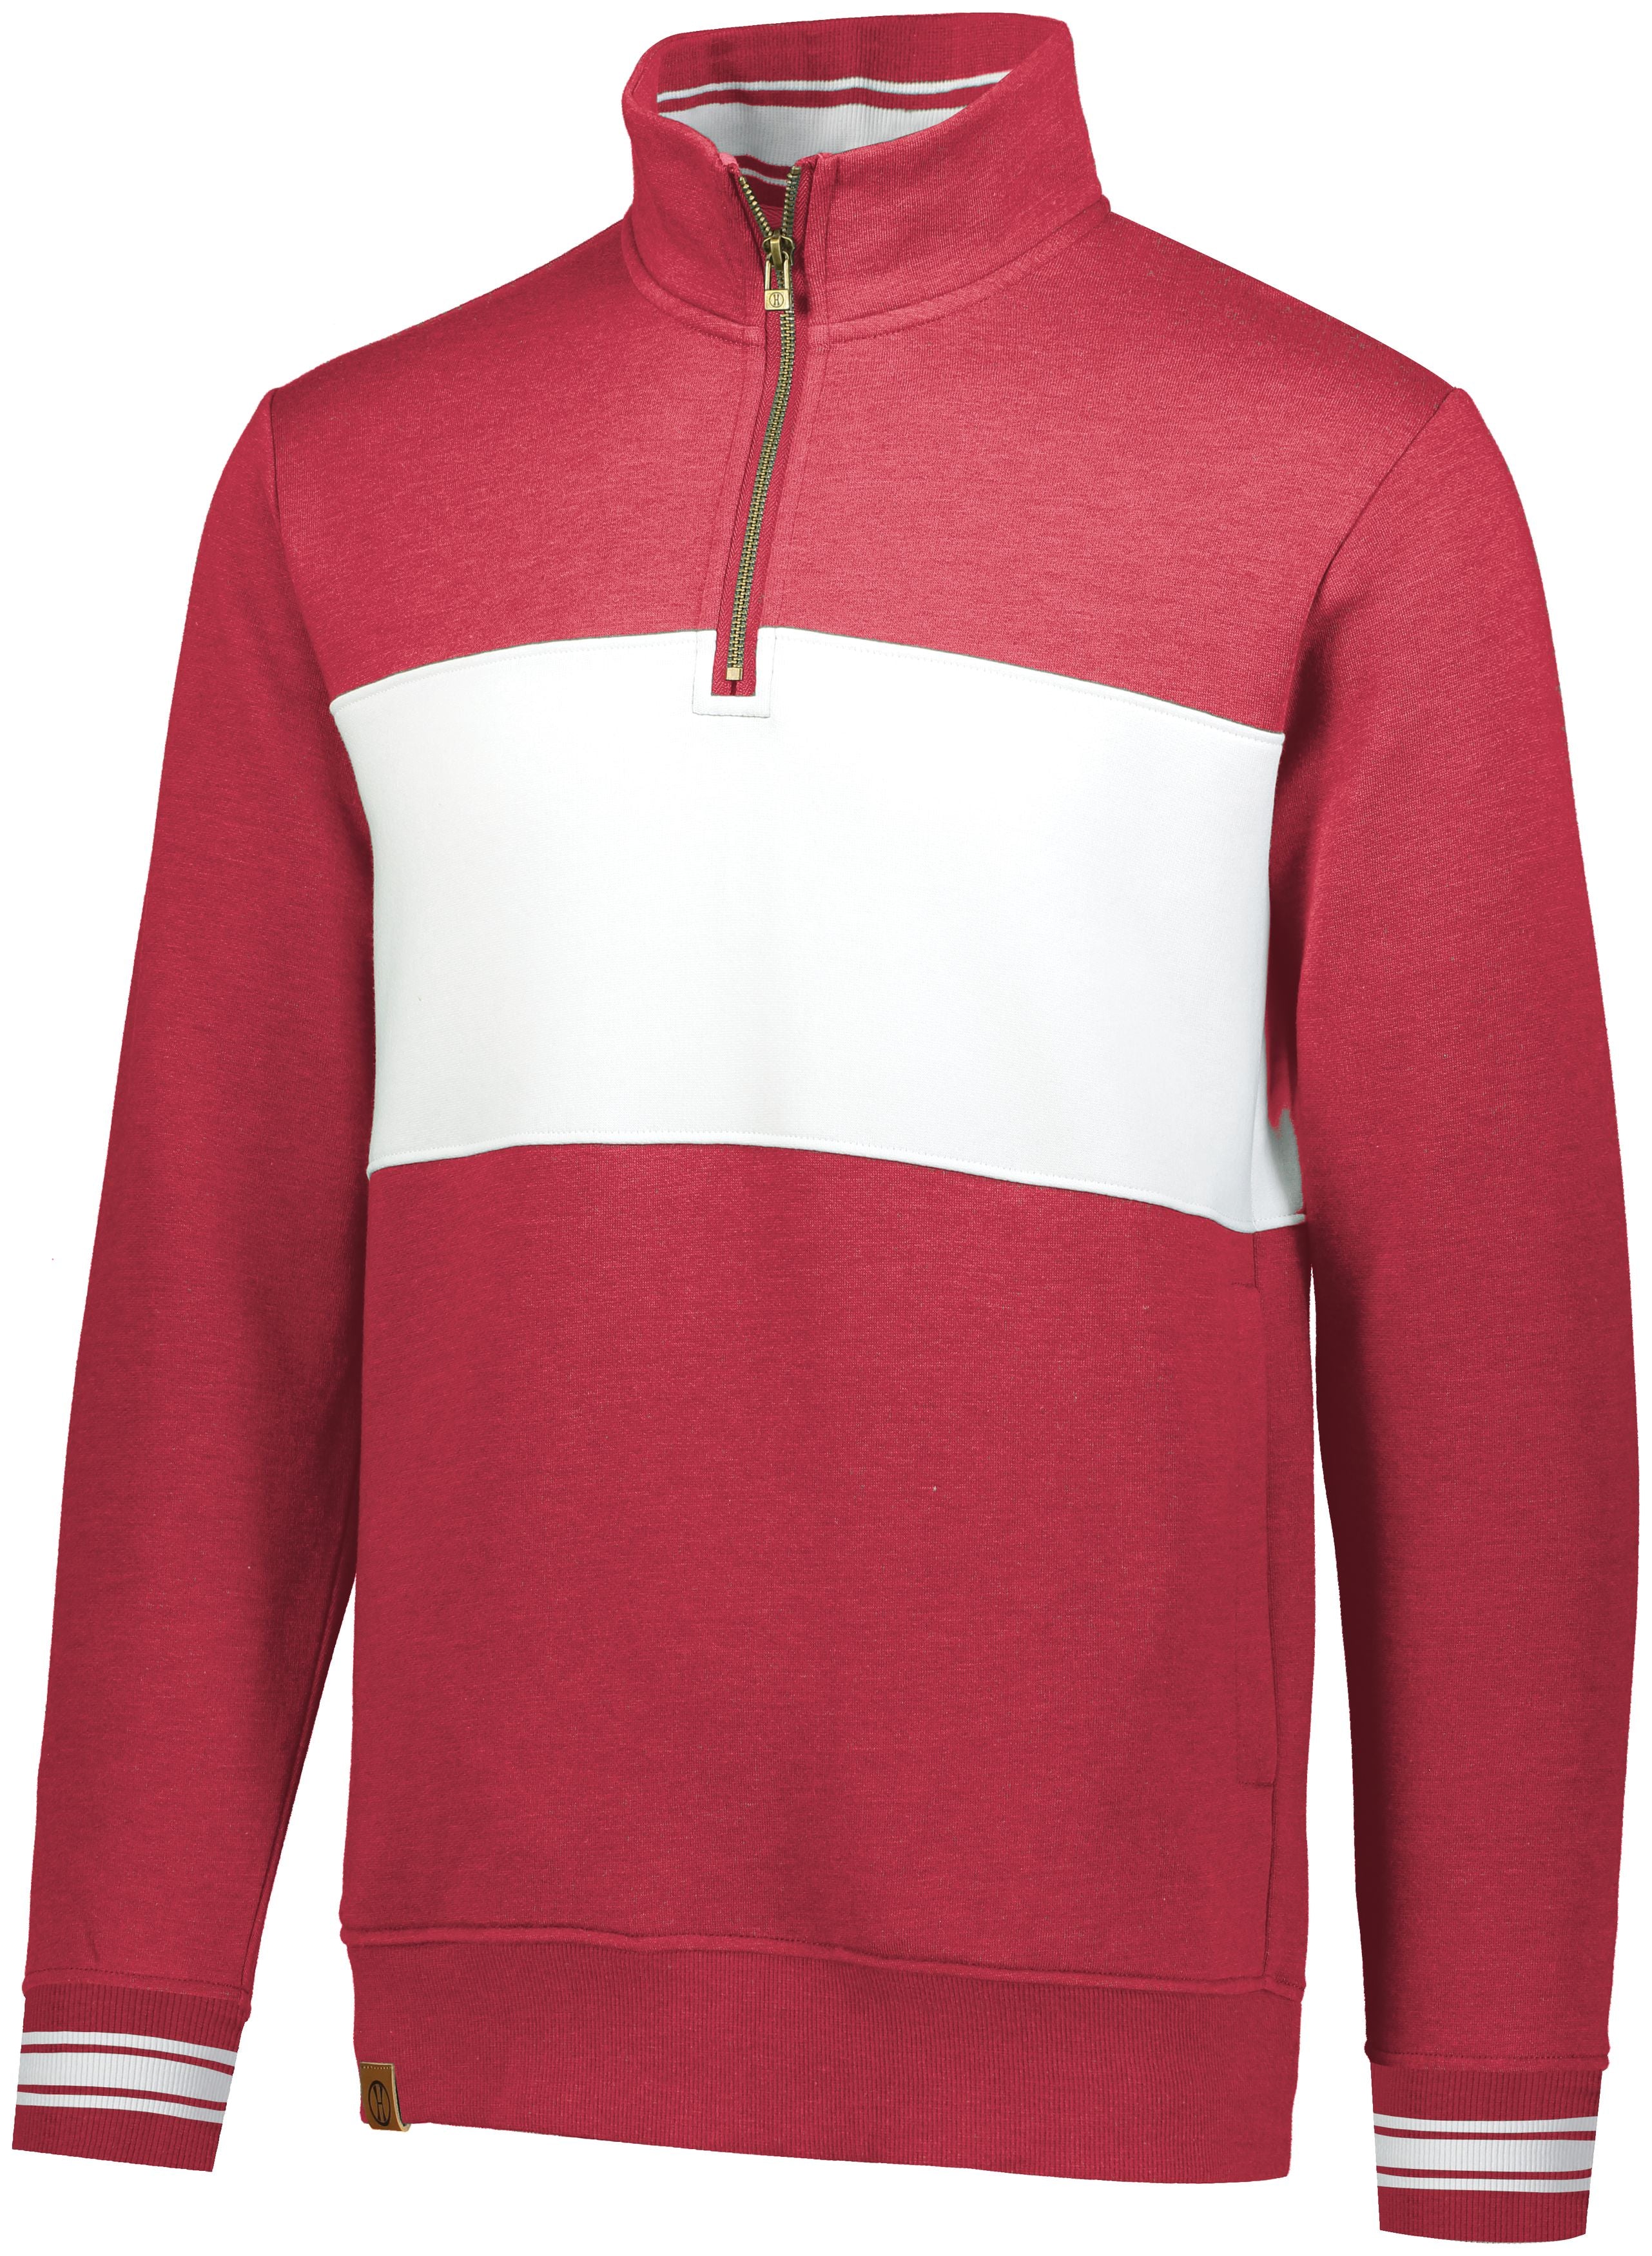 Holloway Ivy League Pullover